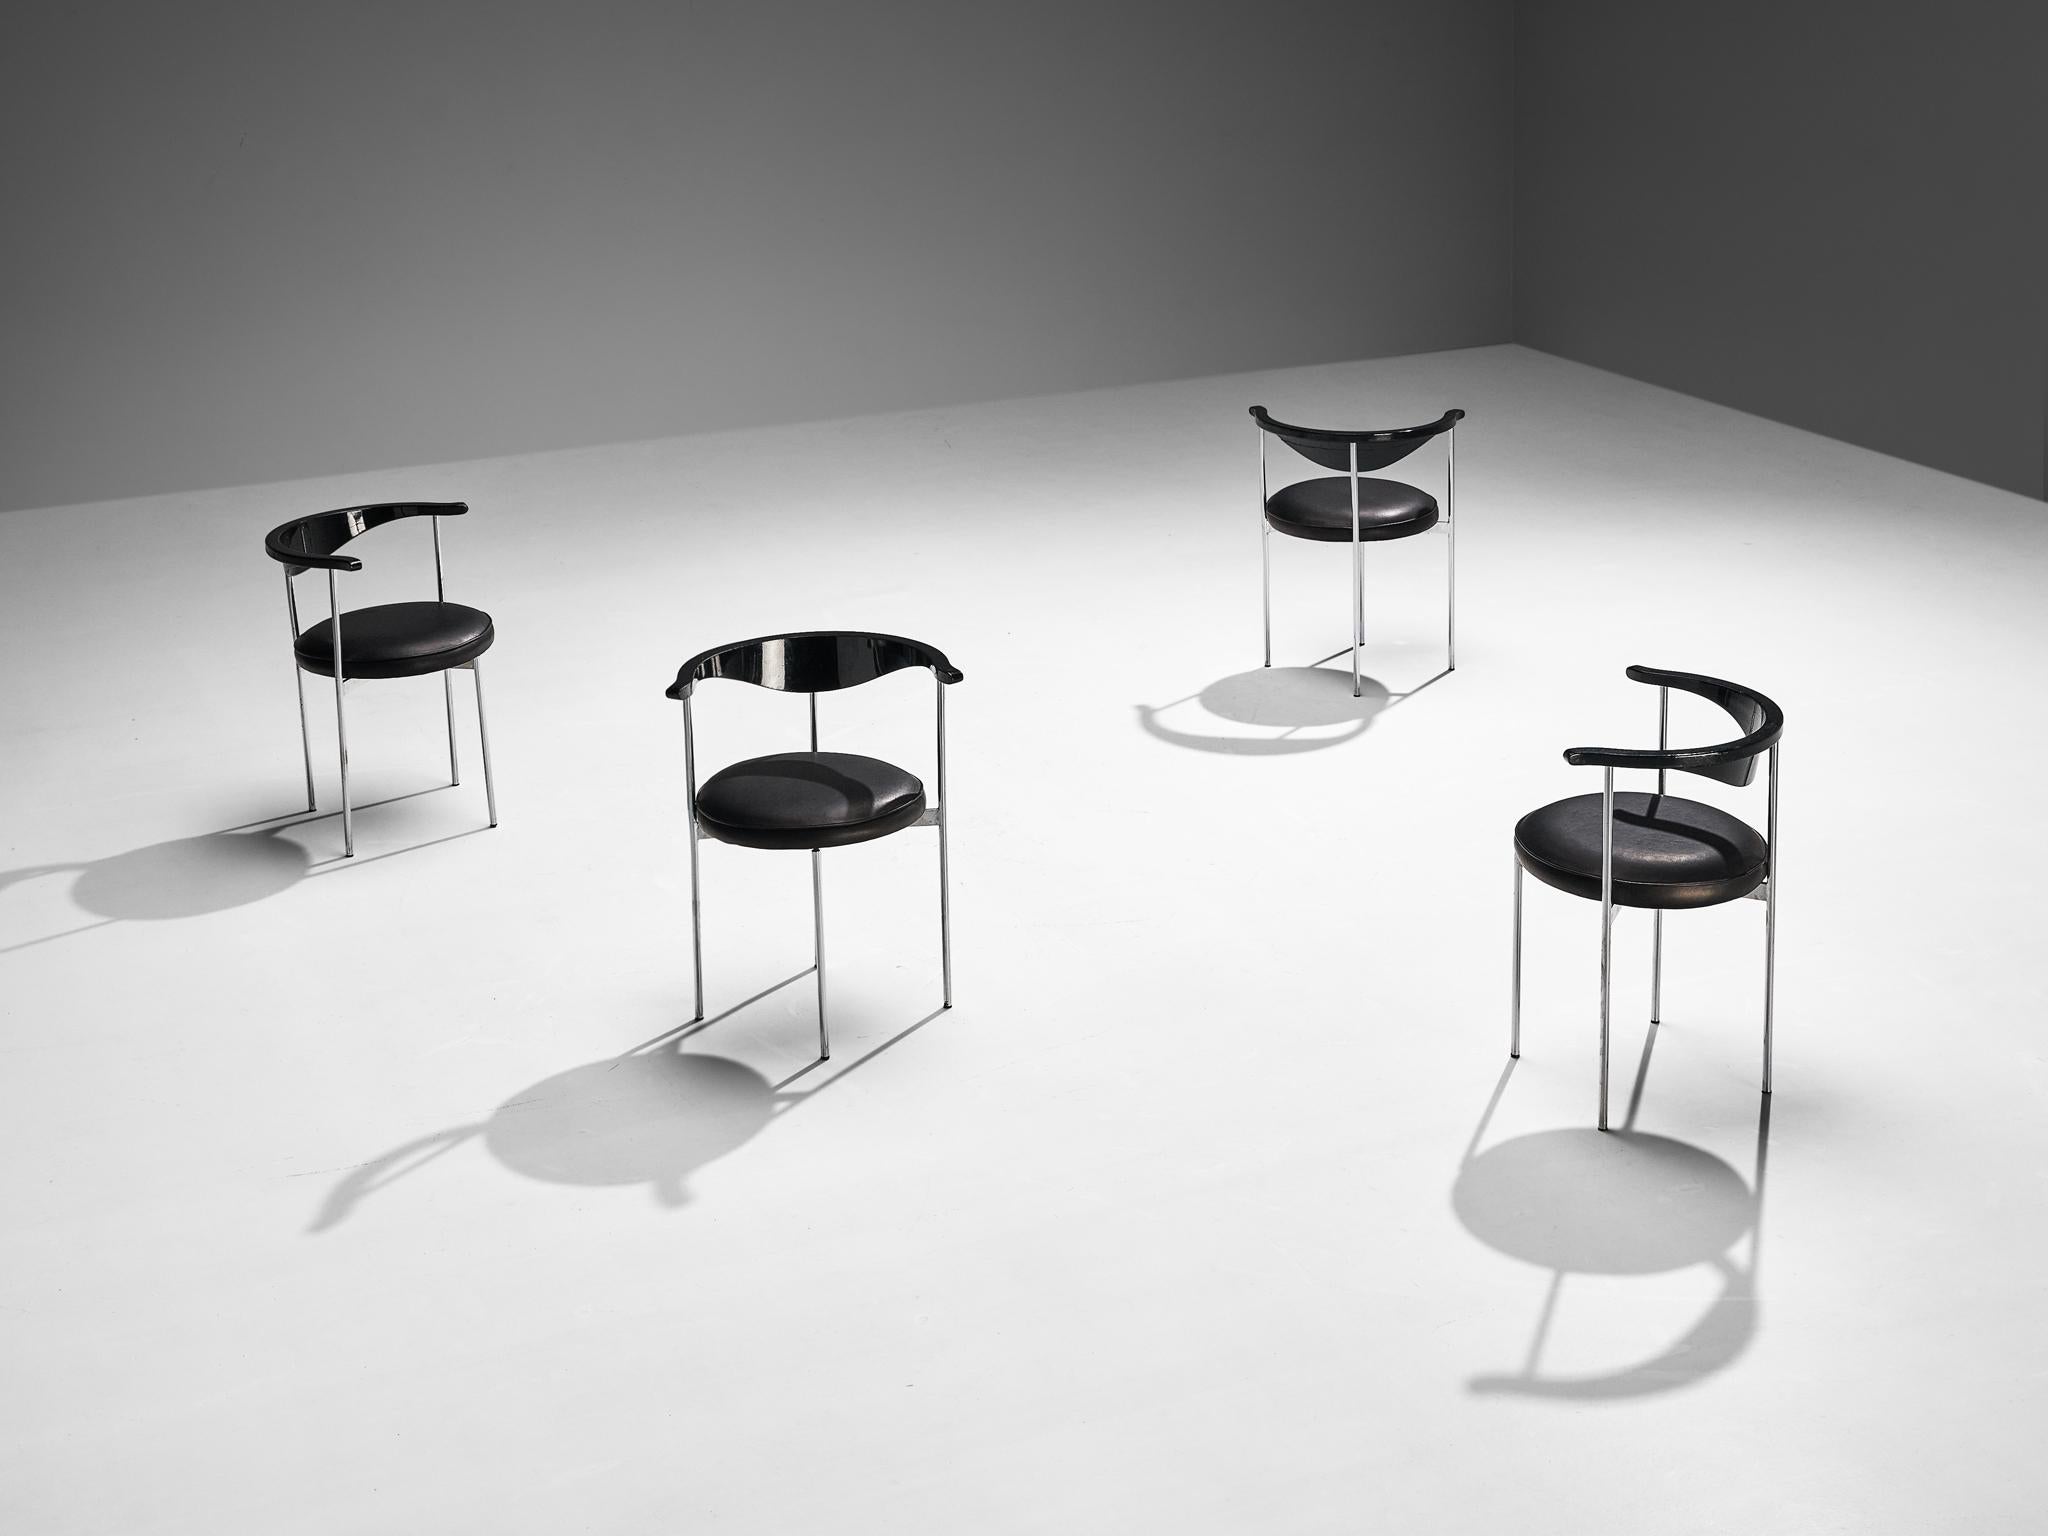 Frederik Sieck for Fritz Hansen, pair of chairs model 3200, skai, black lacquered wood, metal, Denmark, design 1962

This industrial set of four chairs was designed by the Swedish designer Frederik Sieck for Fritz Hansen. The round chair has a